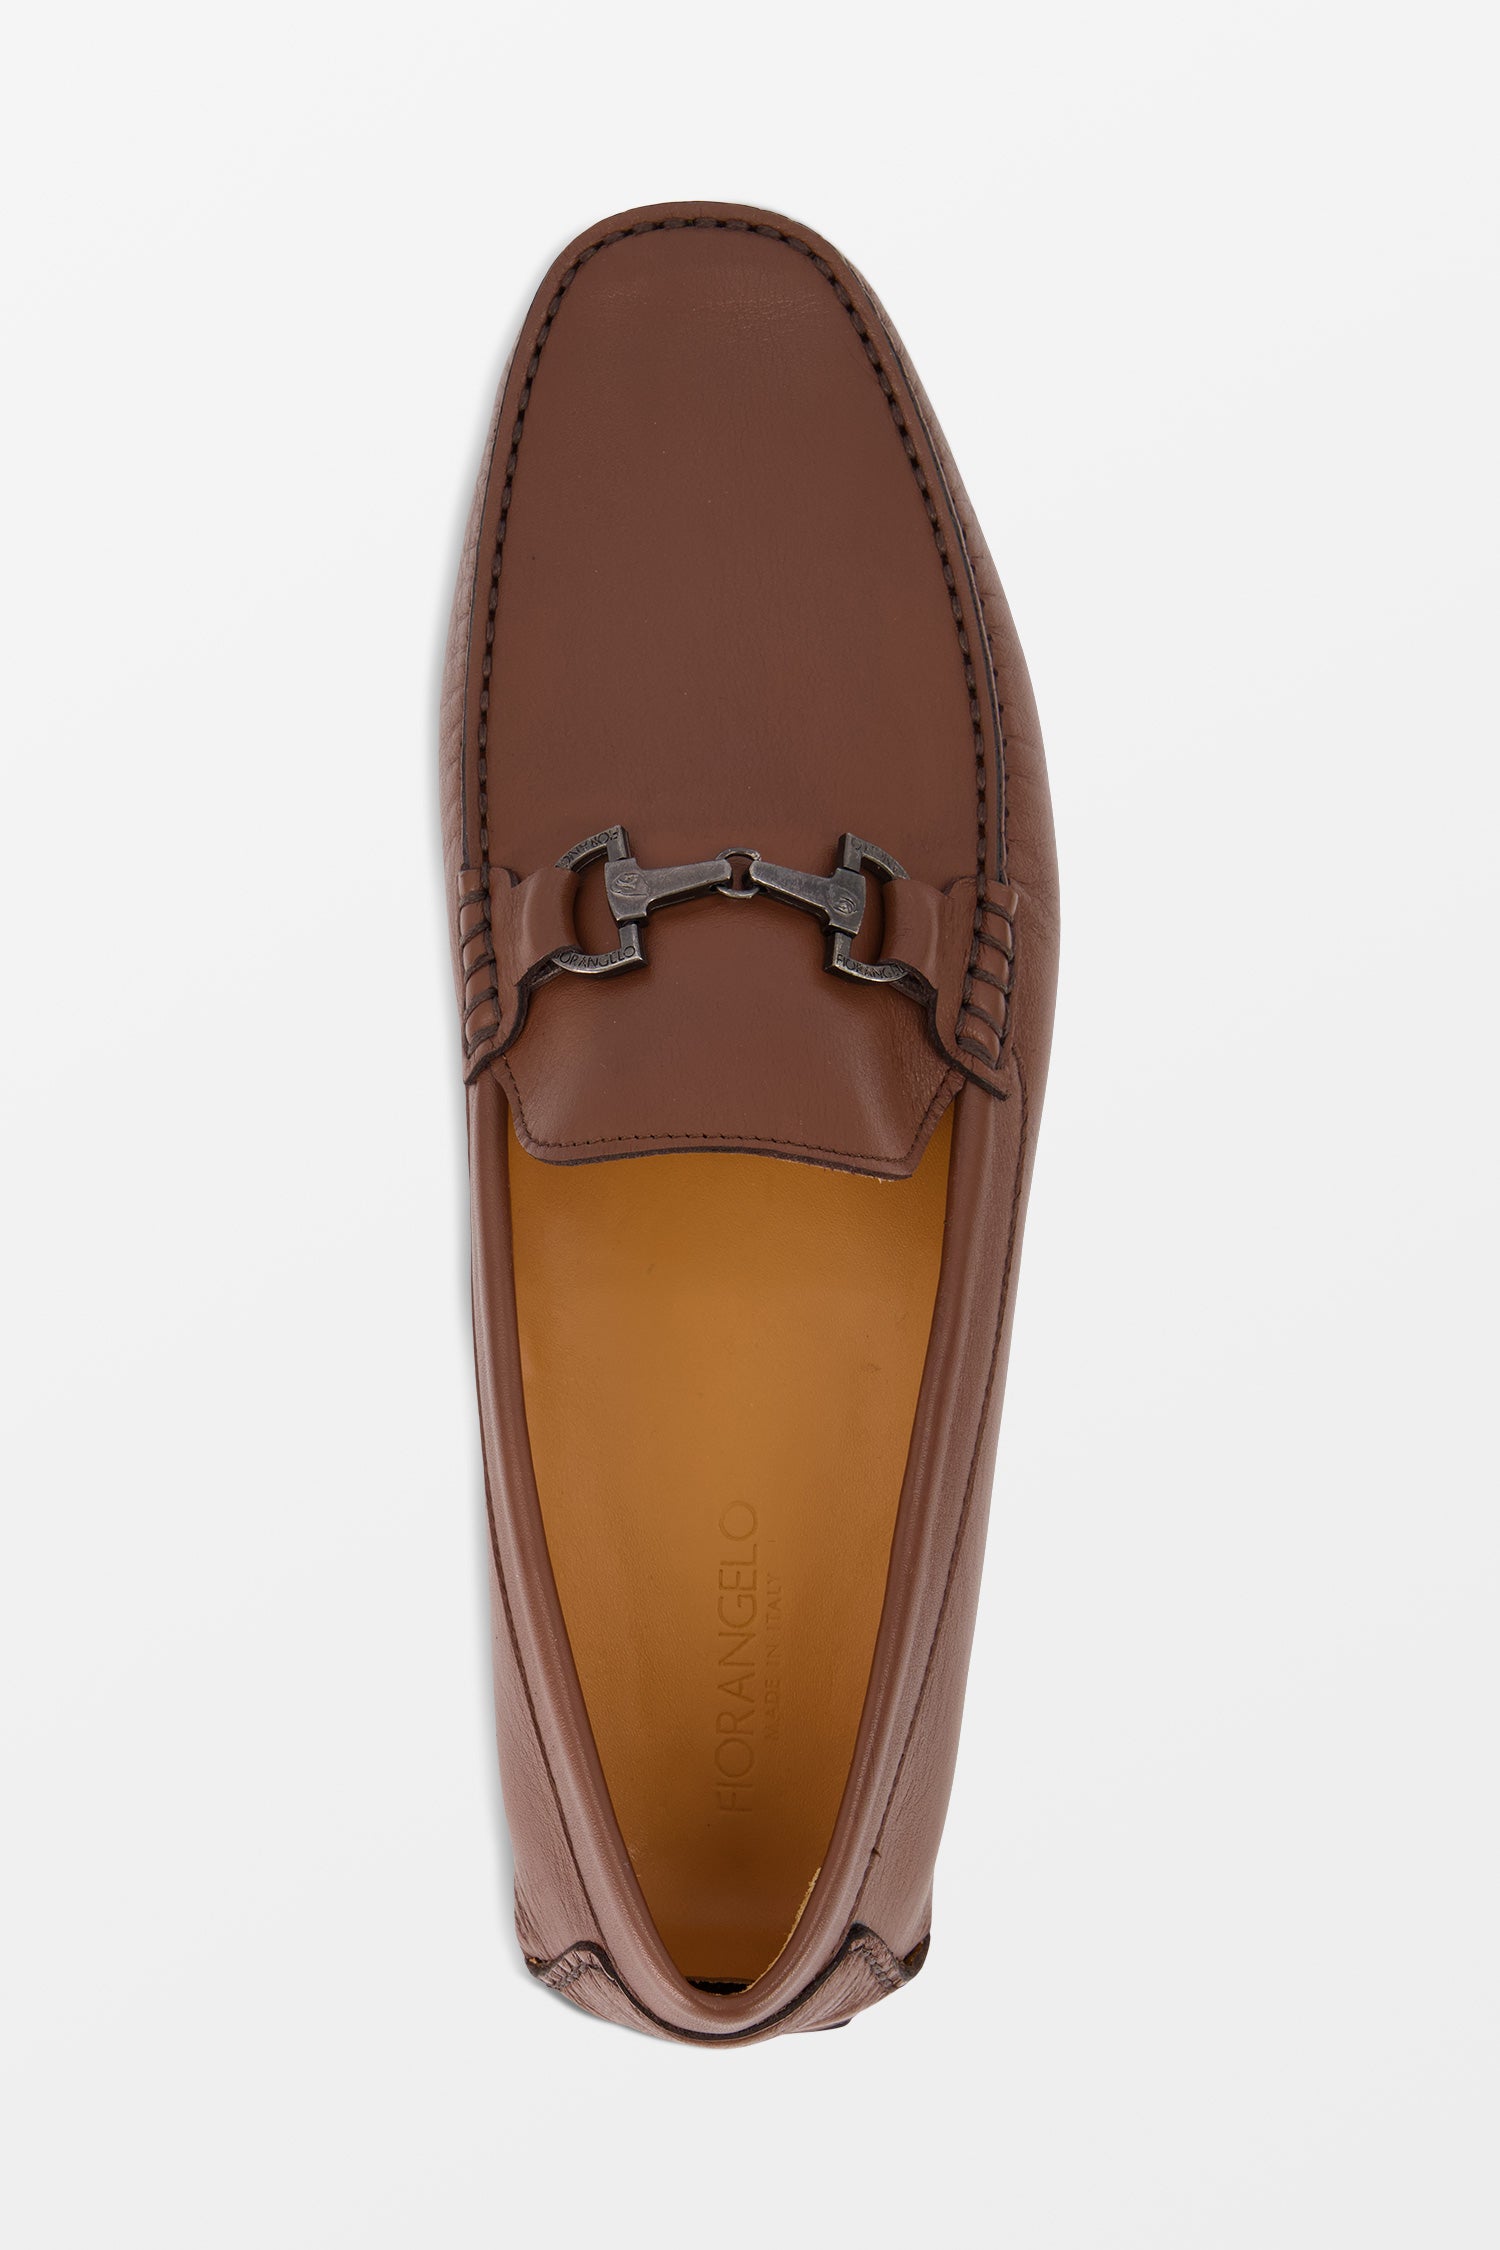 Fiorangelo Leather Brown Moccasins